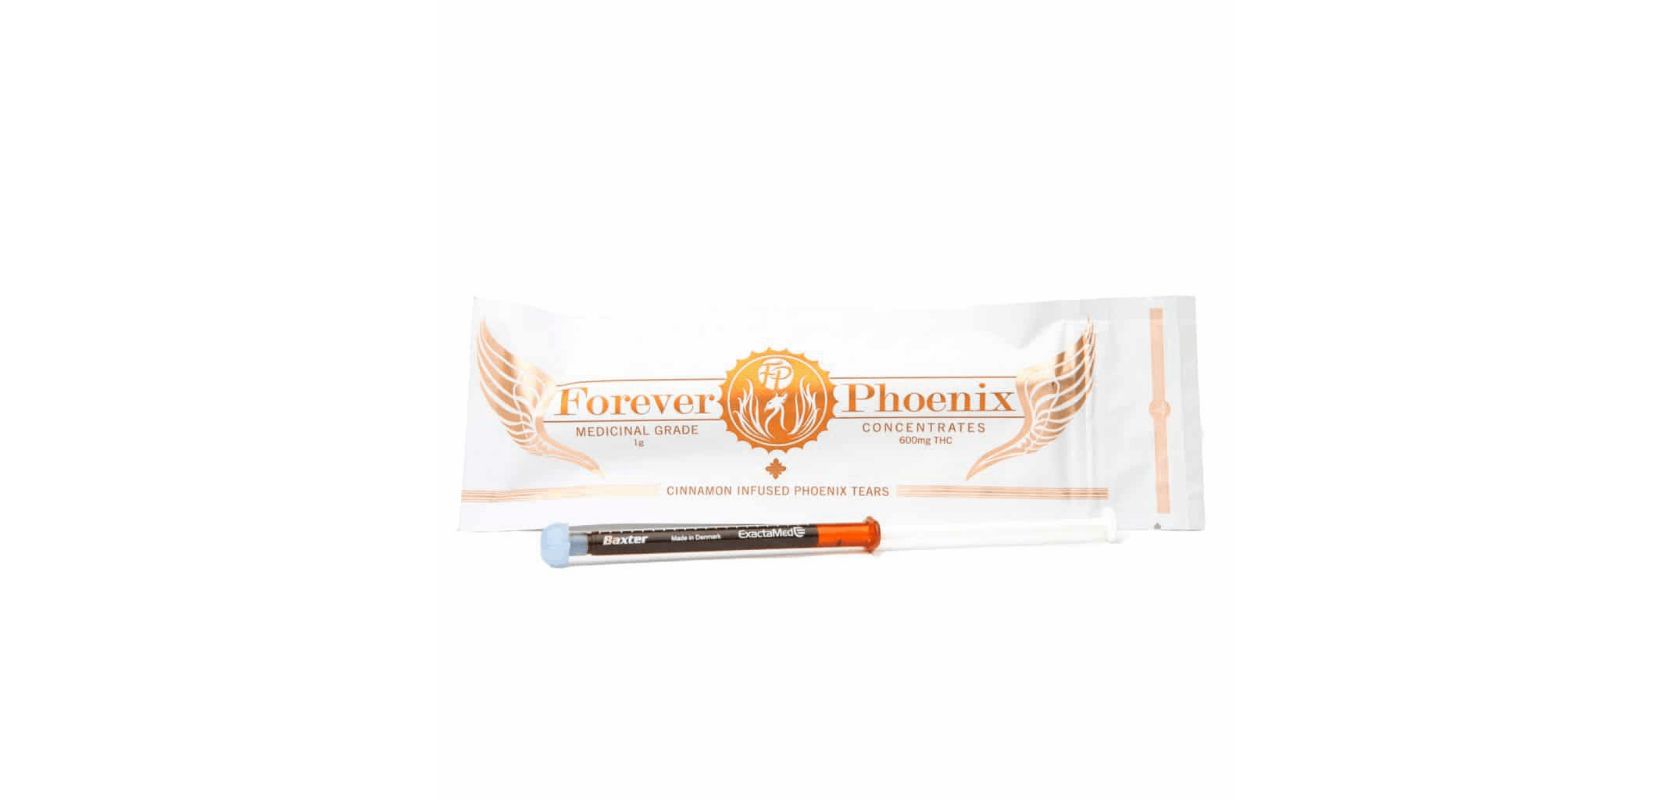 The Forever Phoenix 600mg THC Phoenix Tears – Cinnamon Infused is a highly concentrated weed oil that tastes amazing and works wonders. 